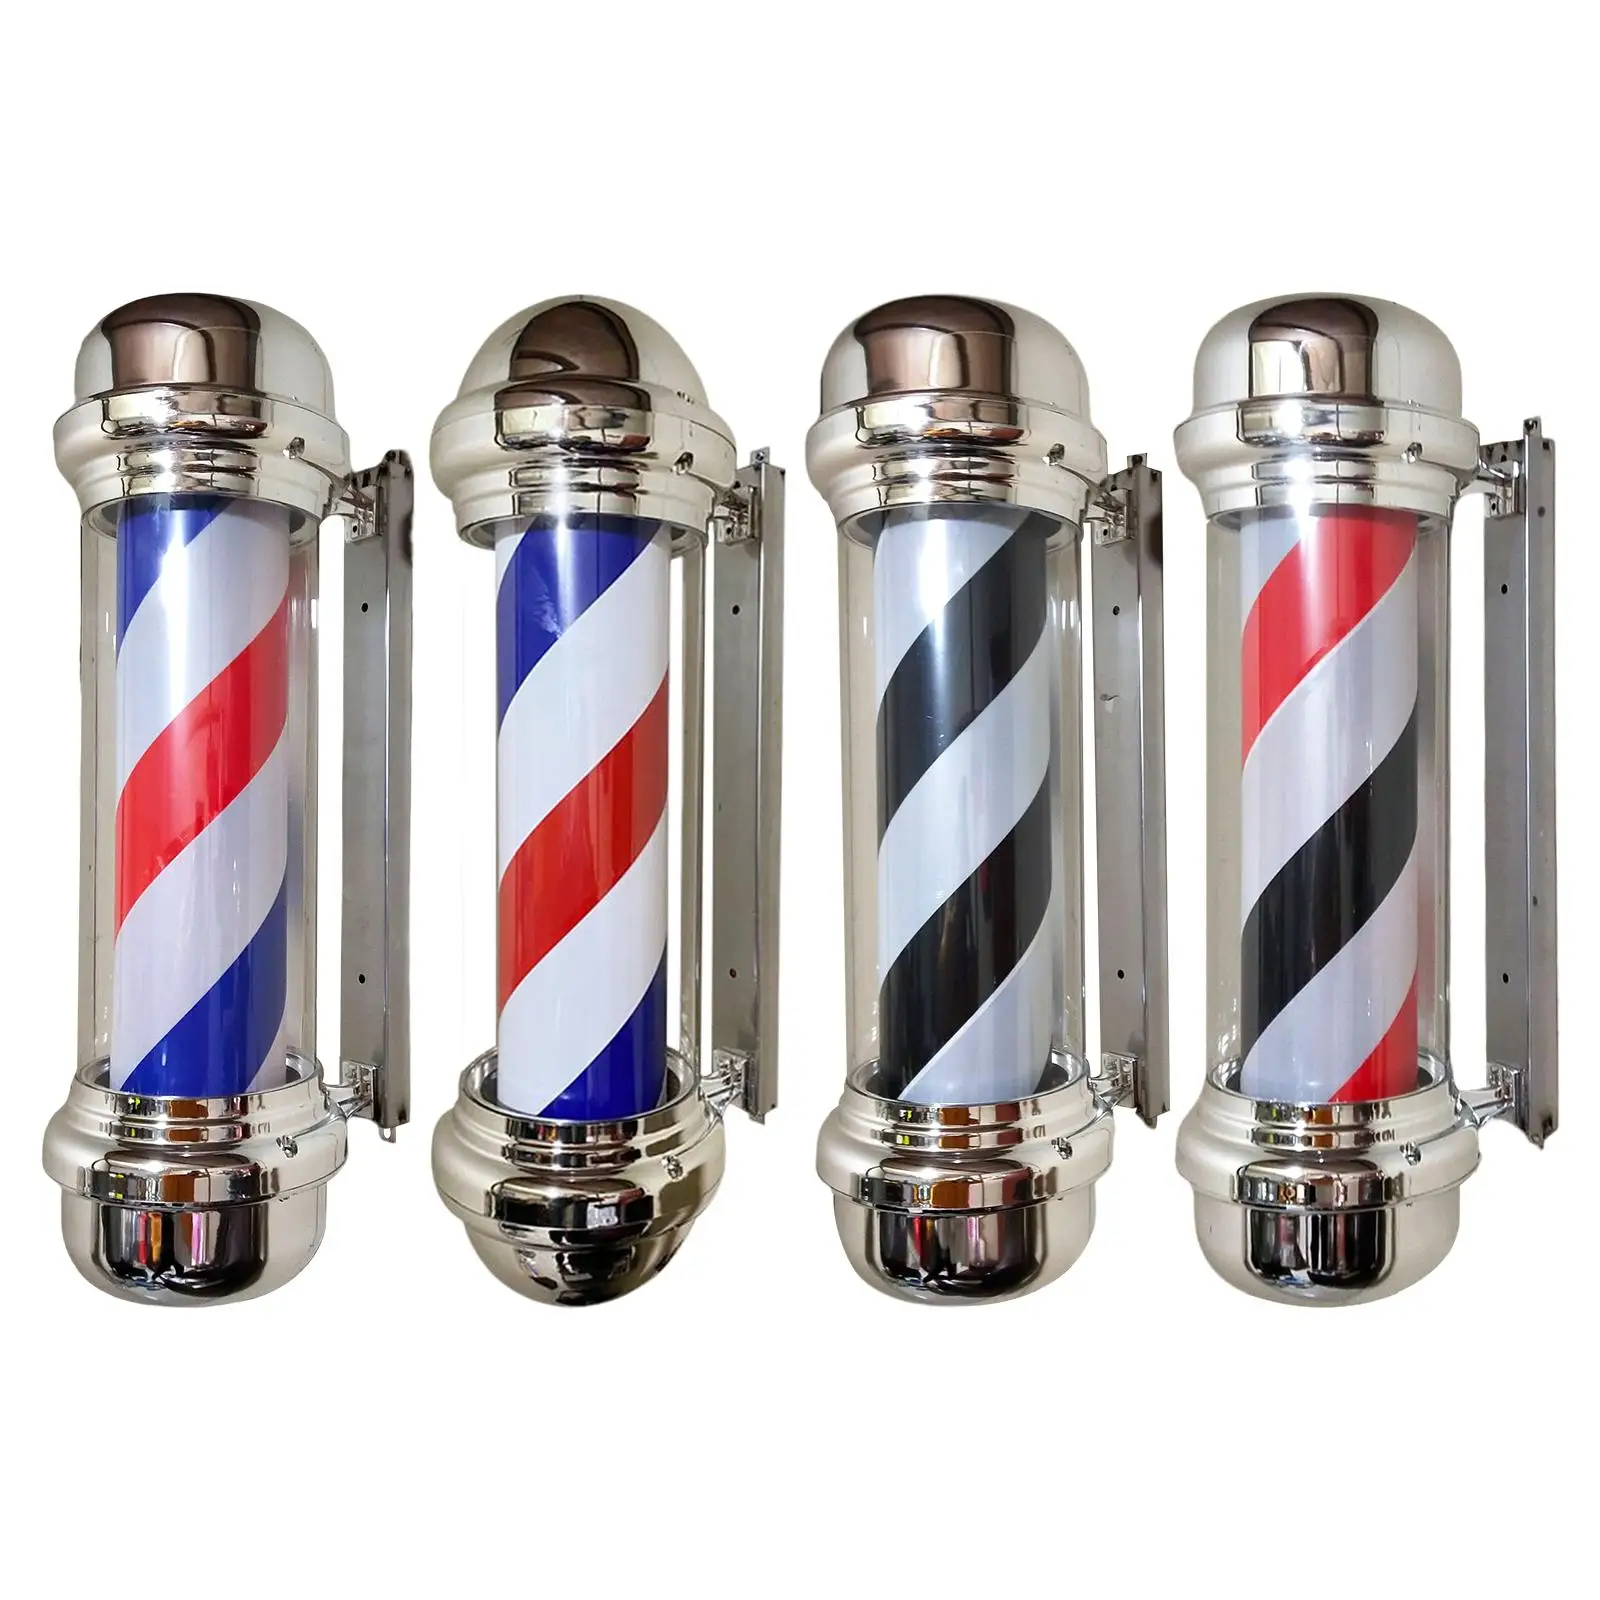 Barber Pole Light Save Energy 23'' Classic Wall Mount Lamp Hair Salon Open Sign Barber Shop Rotating Light for Indoor Outdoor